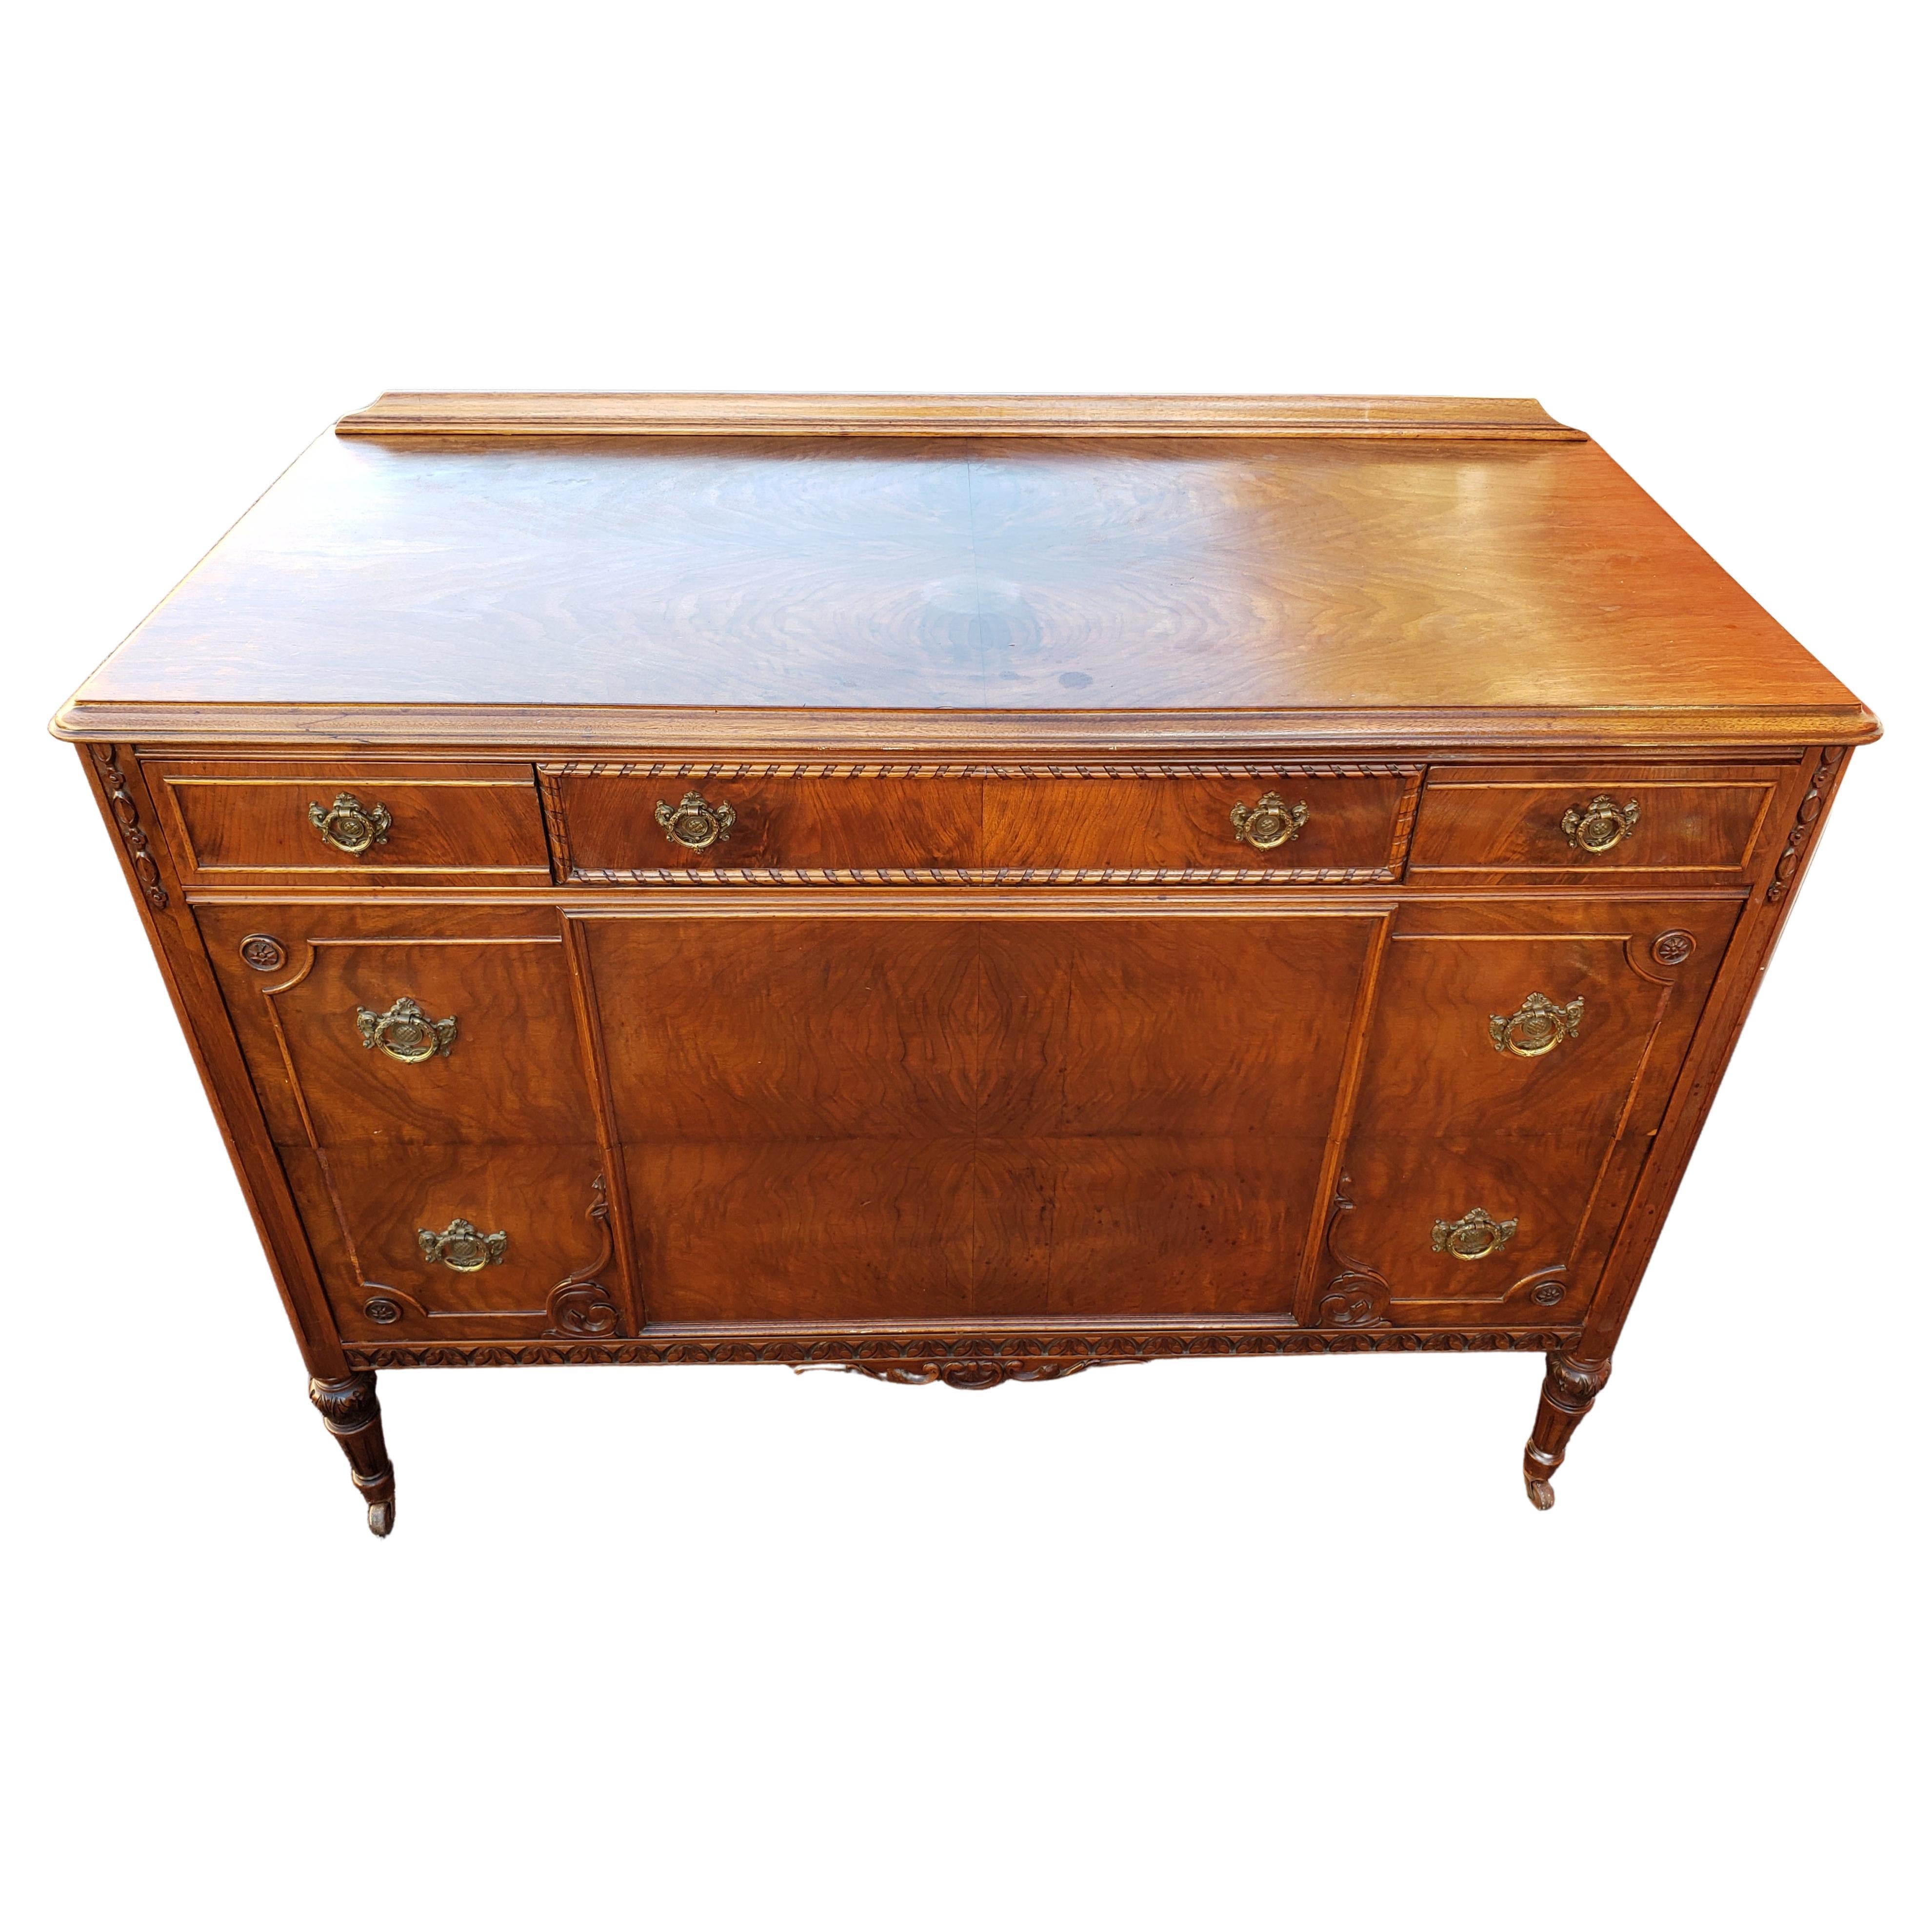 Beautiful, well crafted Dresser from the very reputable Phenix Furniture Co, Warren Pa. Very well made. Quality construction with dovetail finish & wood divided drawers.
This is an antique renaissance style French dresser. The piece is on wheels for